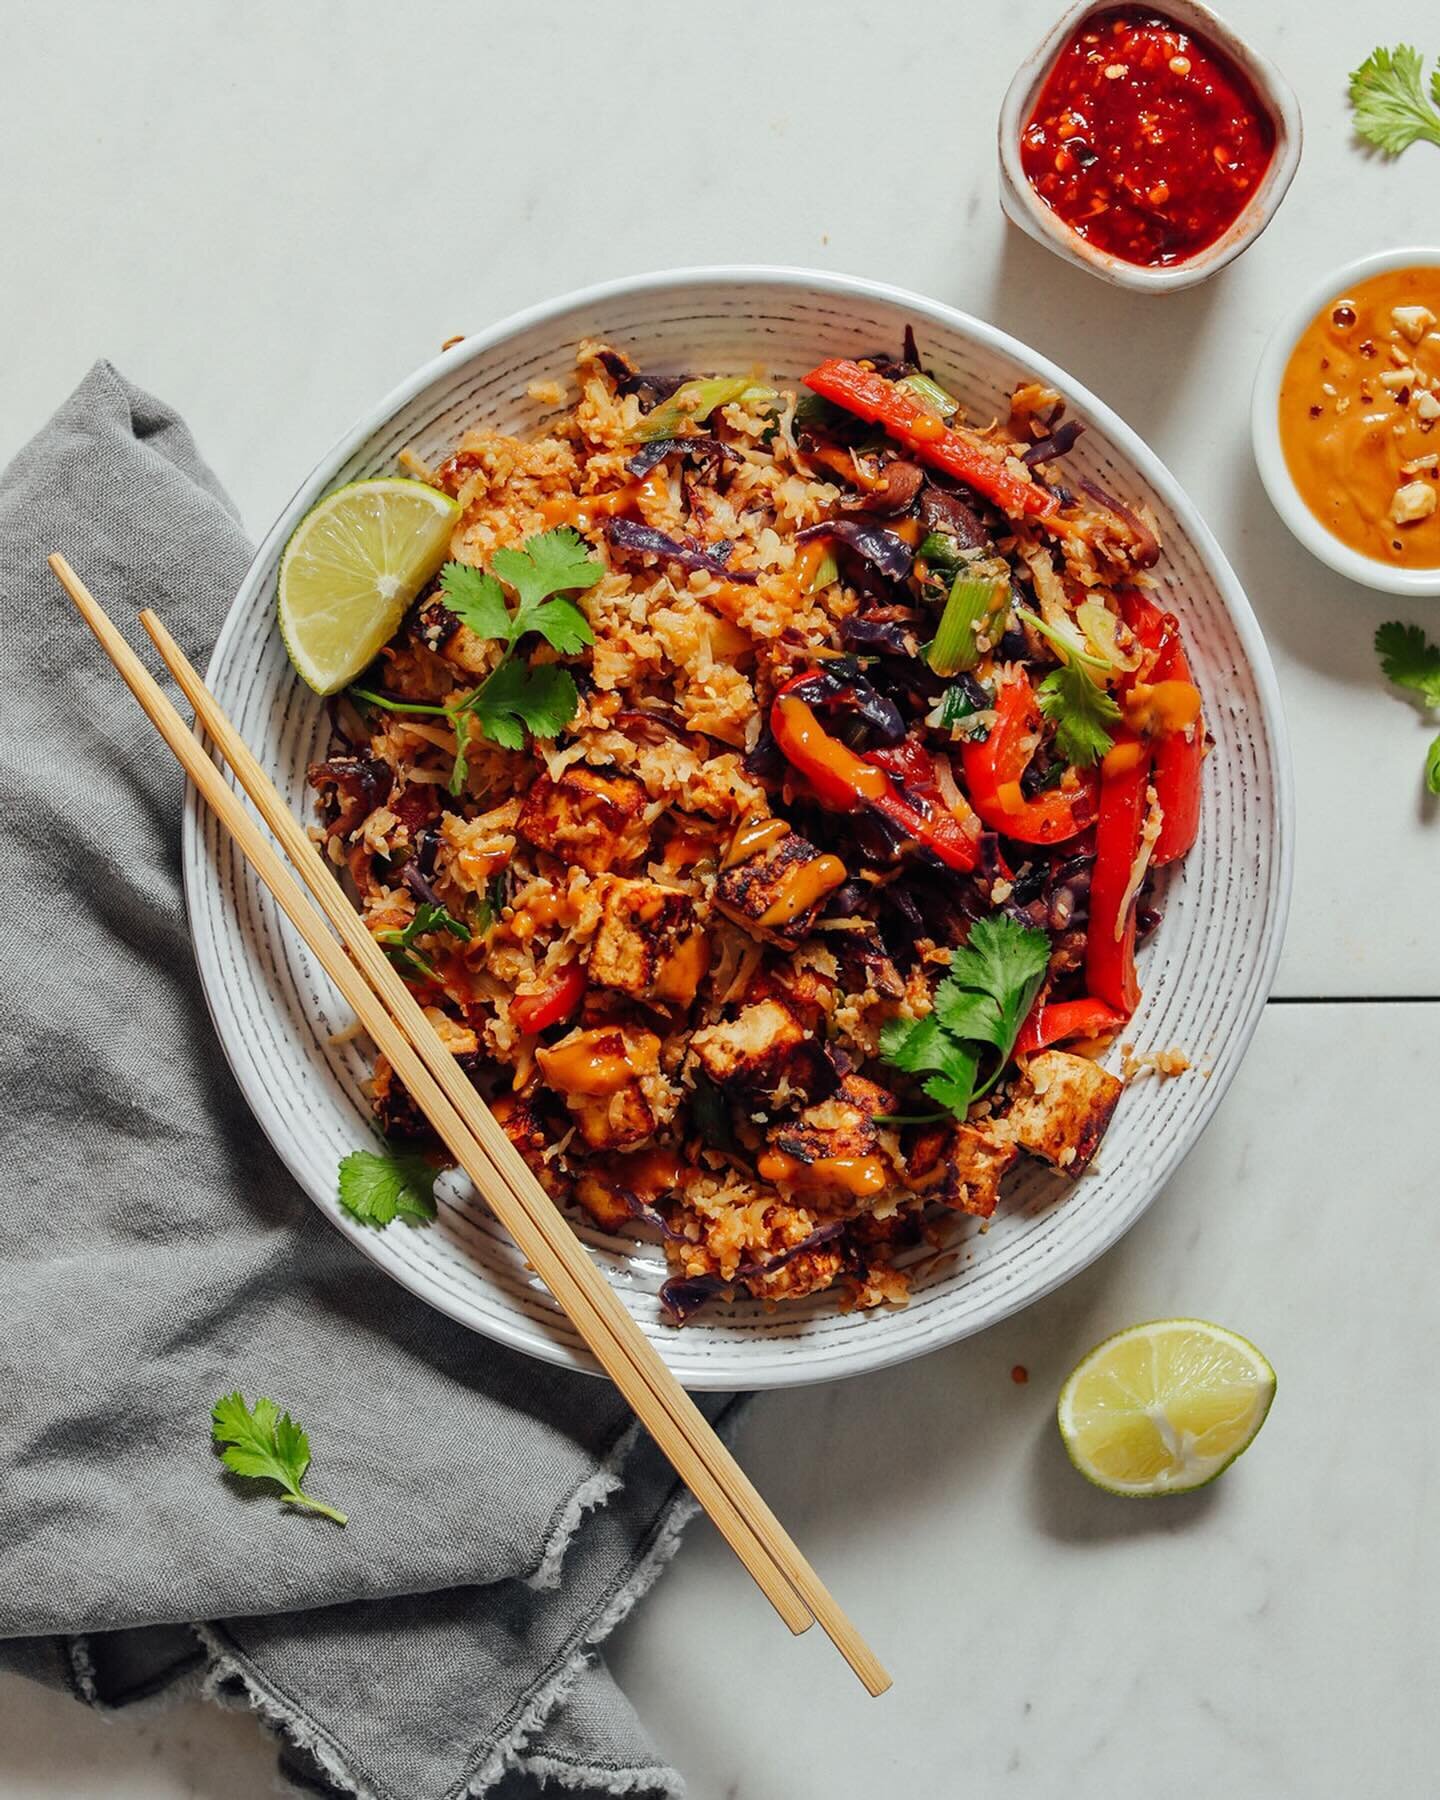 Here are three EASY gluten-free dinner ideas! 💙 Whether you have celiac disease, an intolerance, or are just looking for quick, crowd-pleasing options that incorporate more whole foods and contain LESS gluten, we&rsquo;ve got you covered. Bonus: The